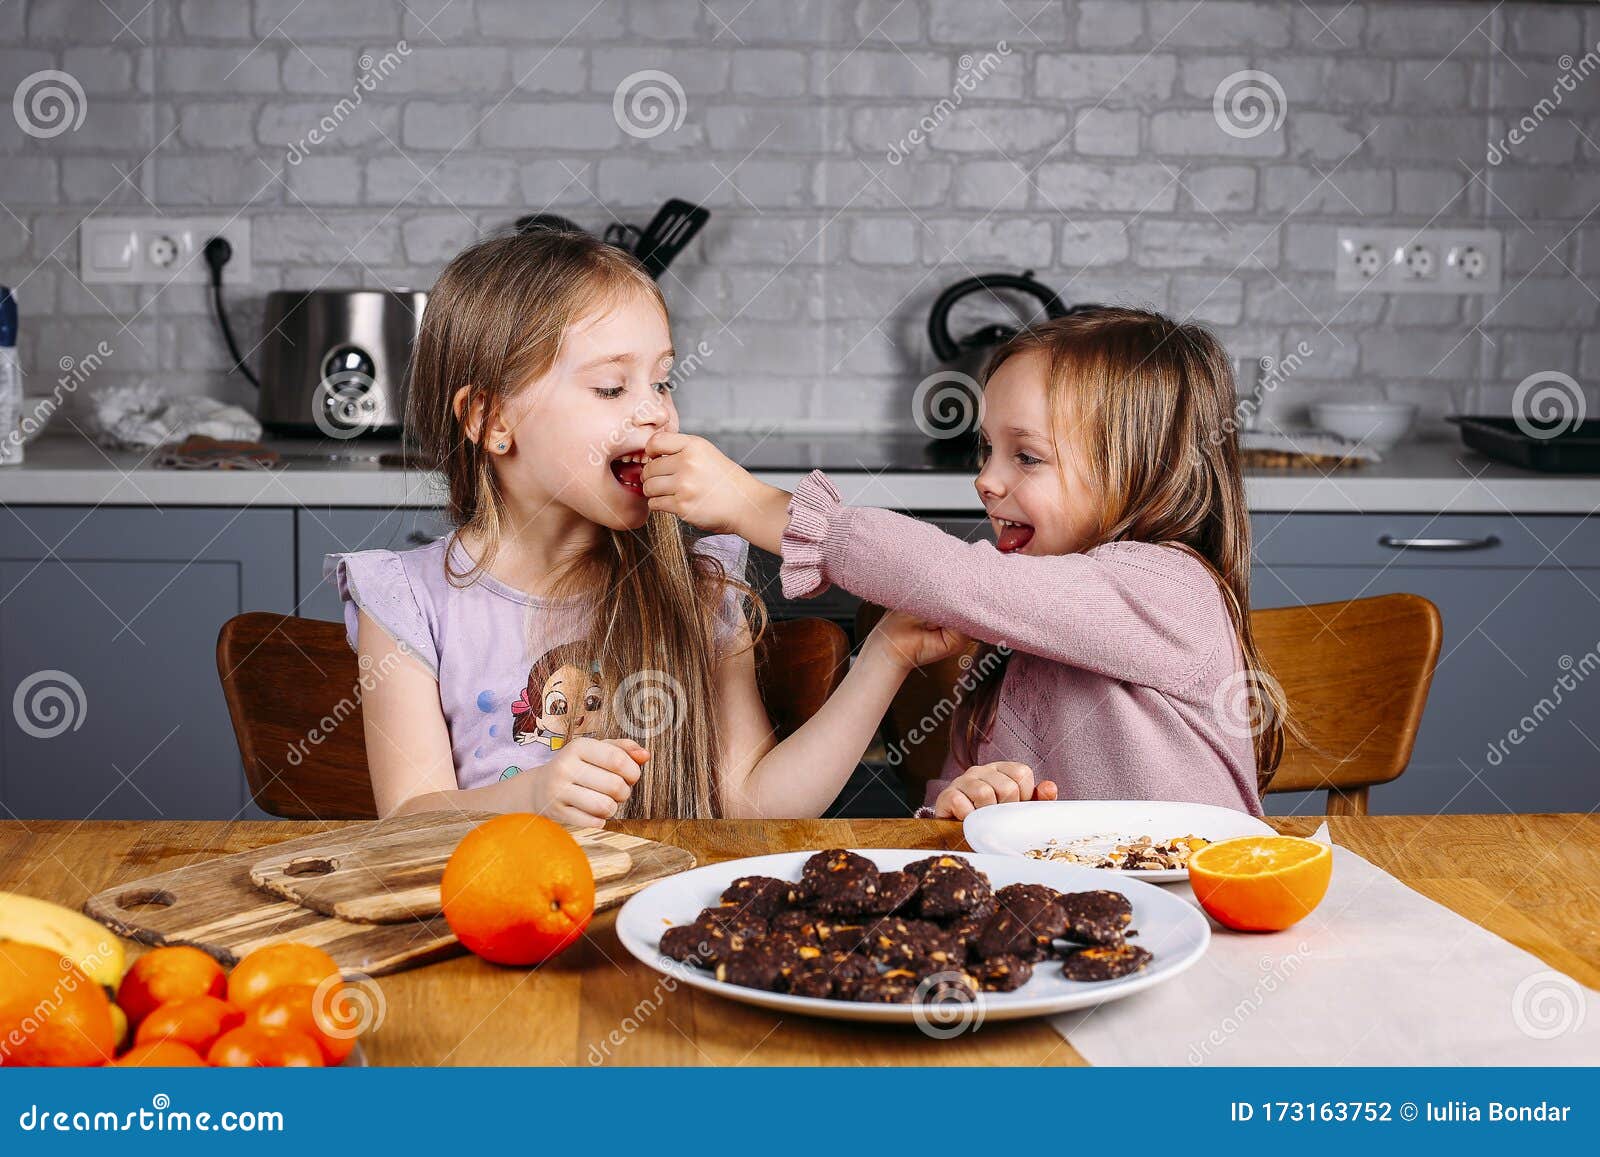 young girls eating biscuits at home